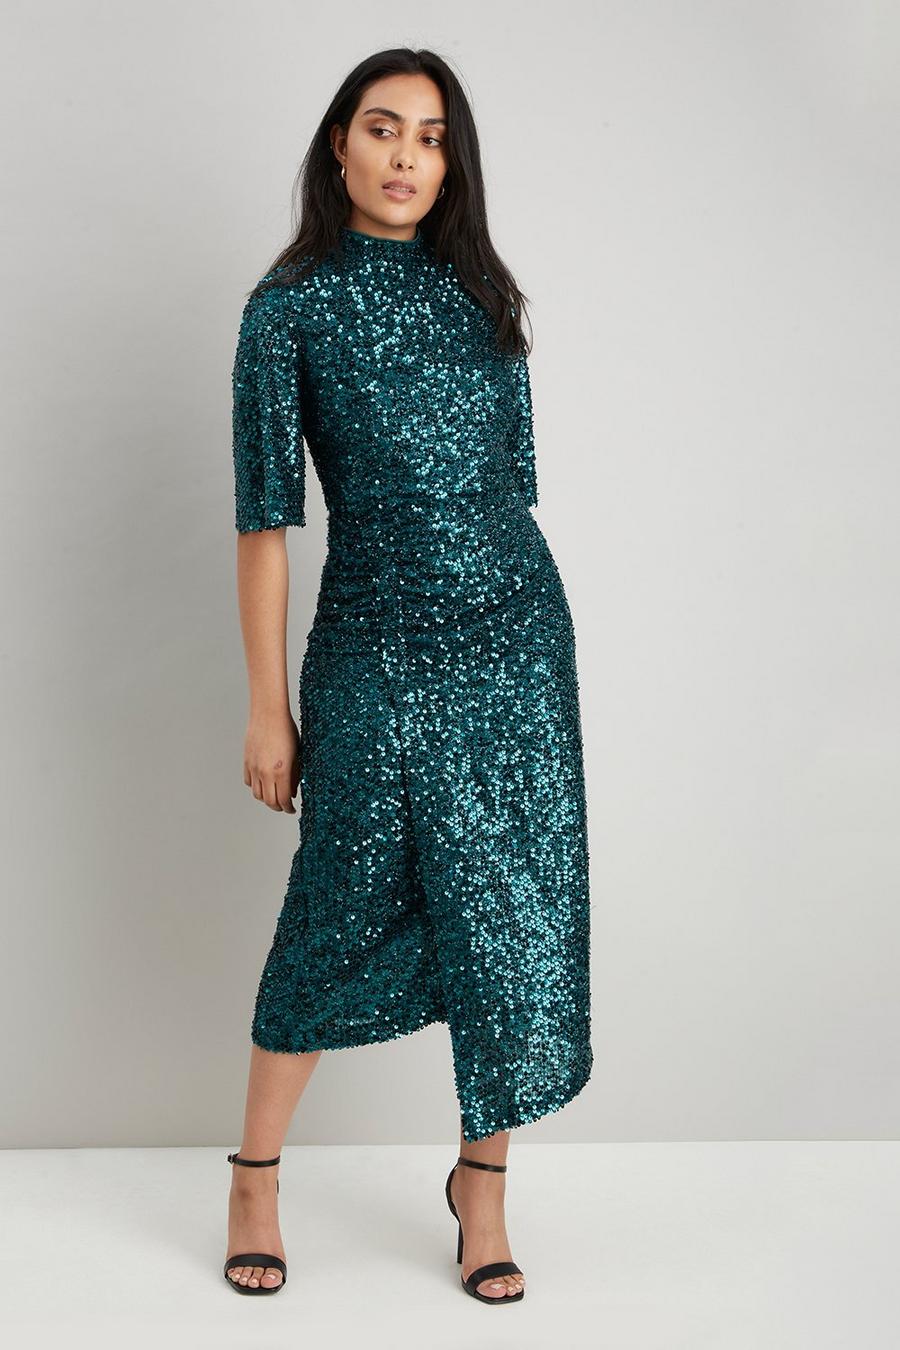 Petite Green Sequin Ruched Side Dress